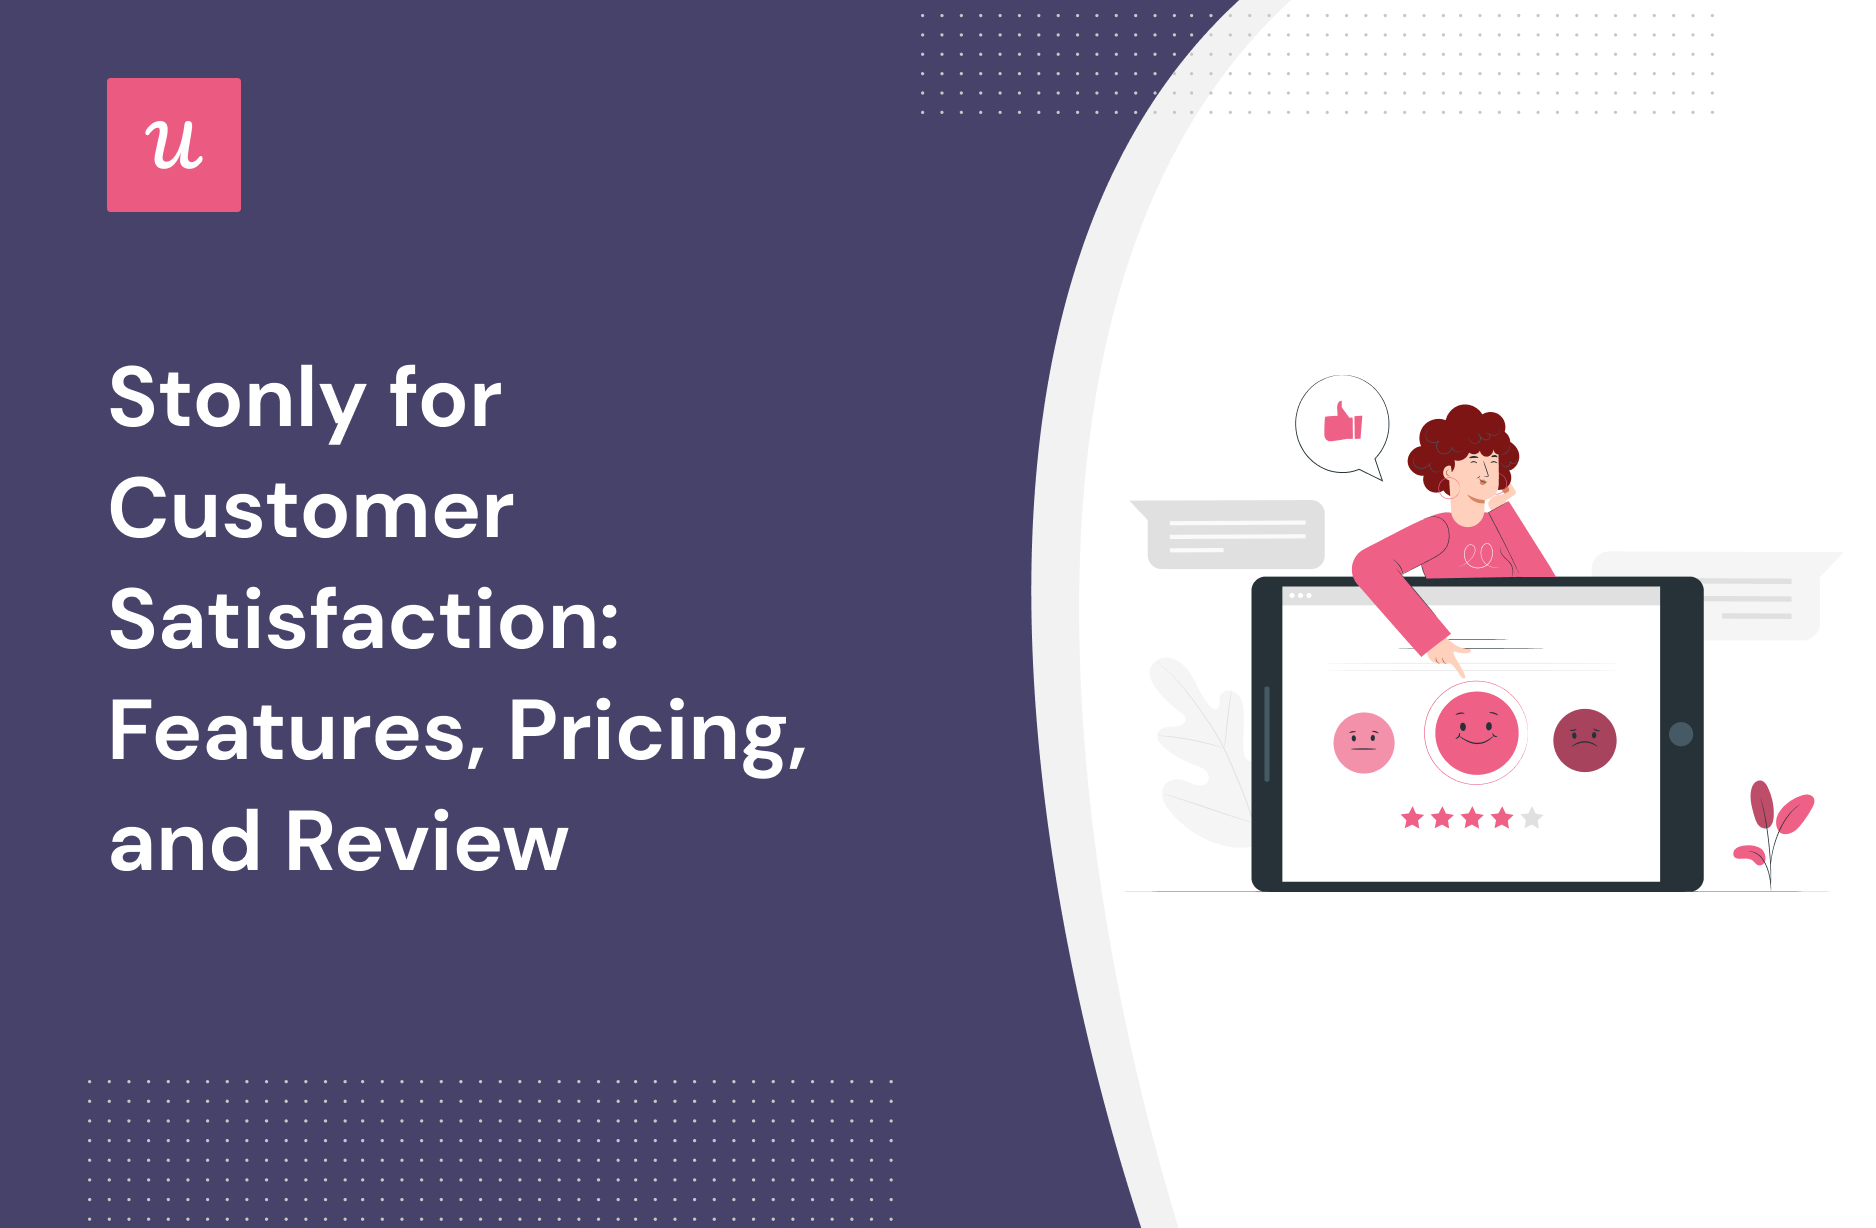 Stonly for Customer Satisfaction: Features, Pricing, and Review